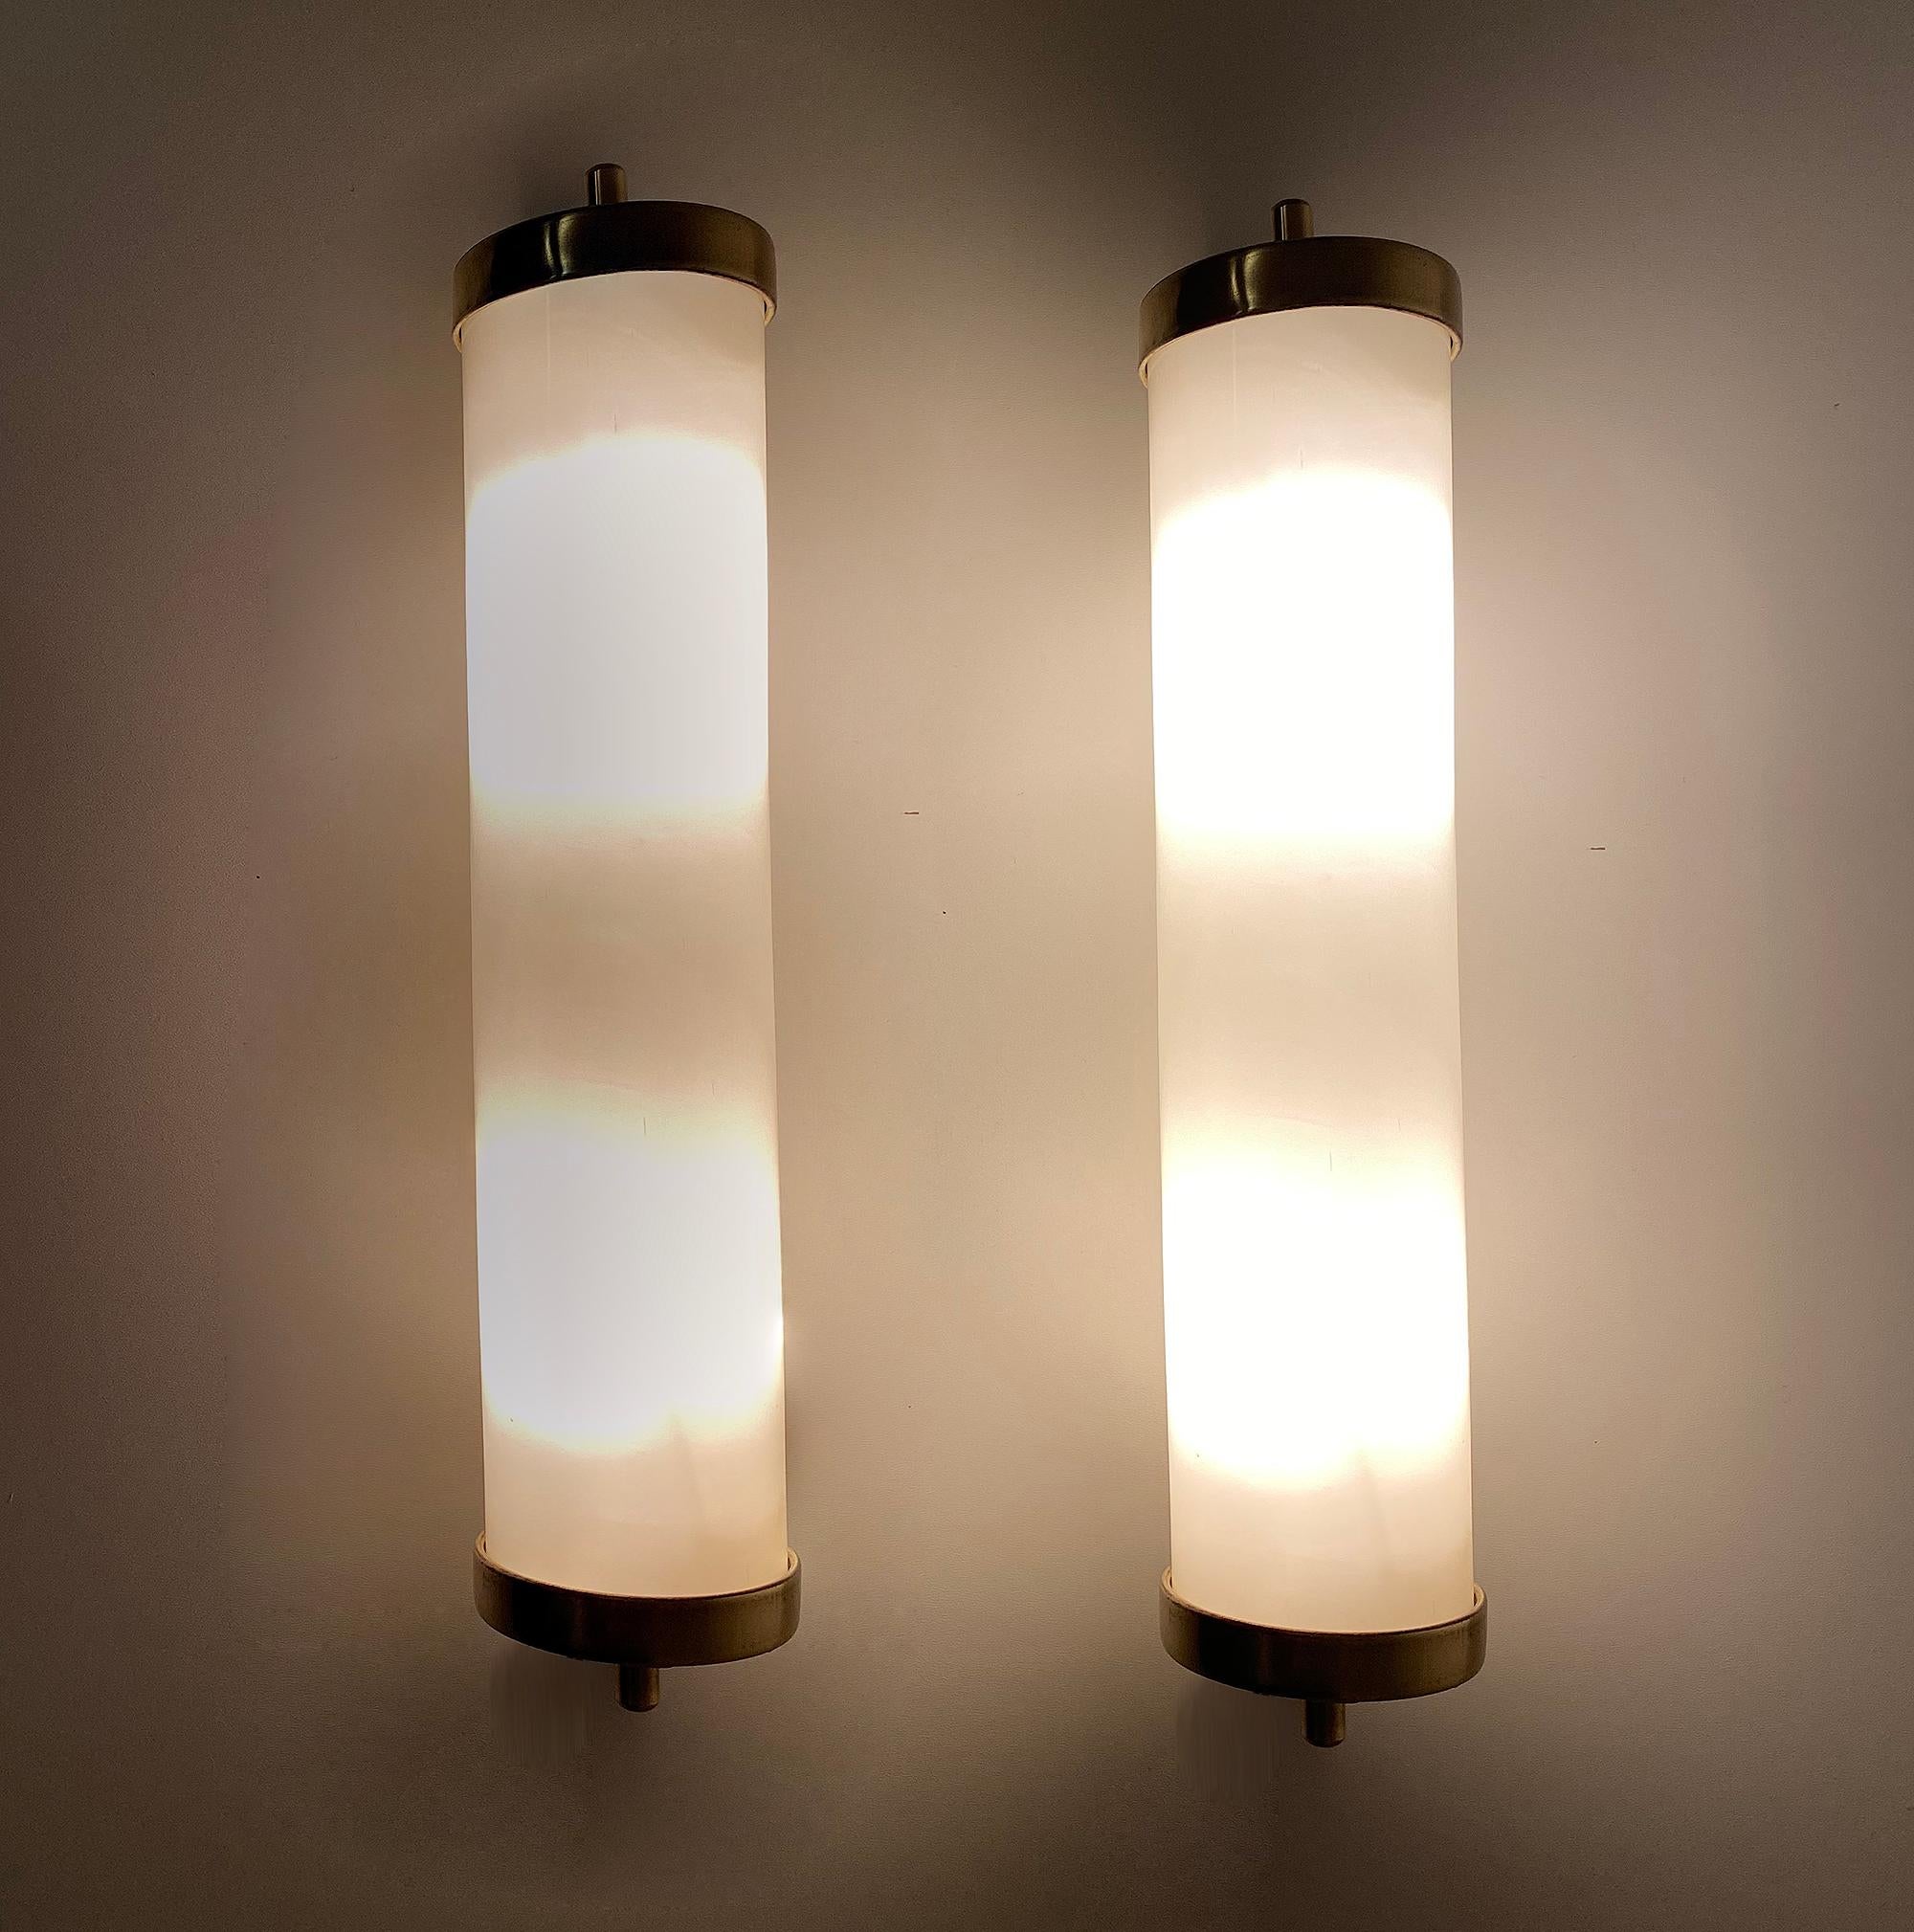 Pair of very large minimalistic design Art Deco sconces, brass base with cream white enameled caps, brass finials, milky cream white opaline glass shade, they can be used both vertically or horizontally.
Fully rewired.
Dimensions:
Height 16.93